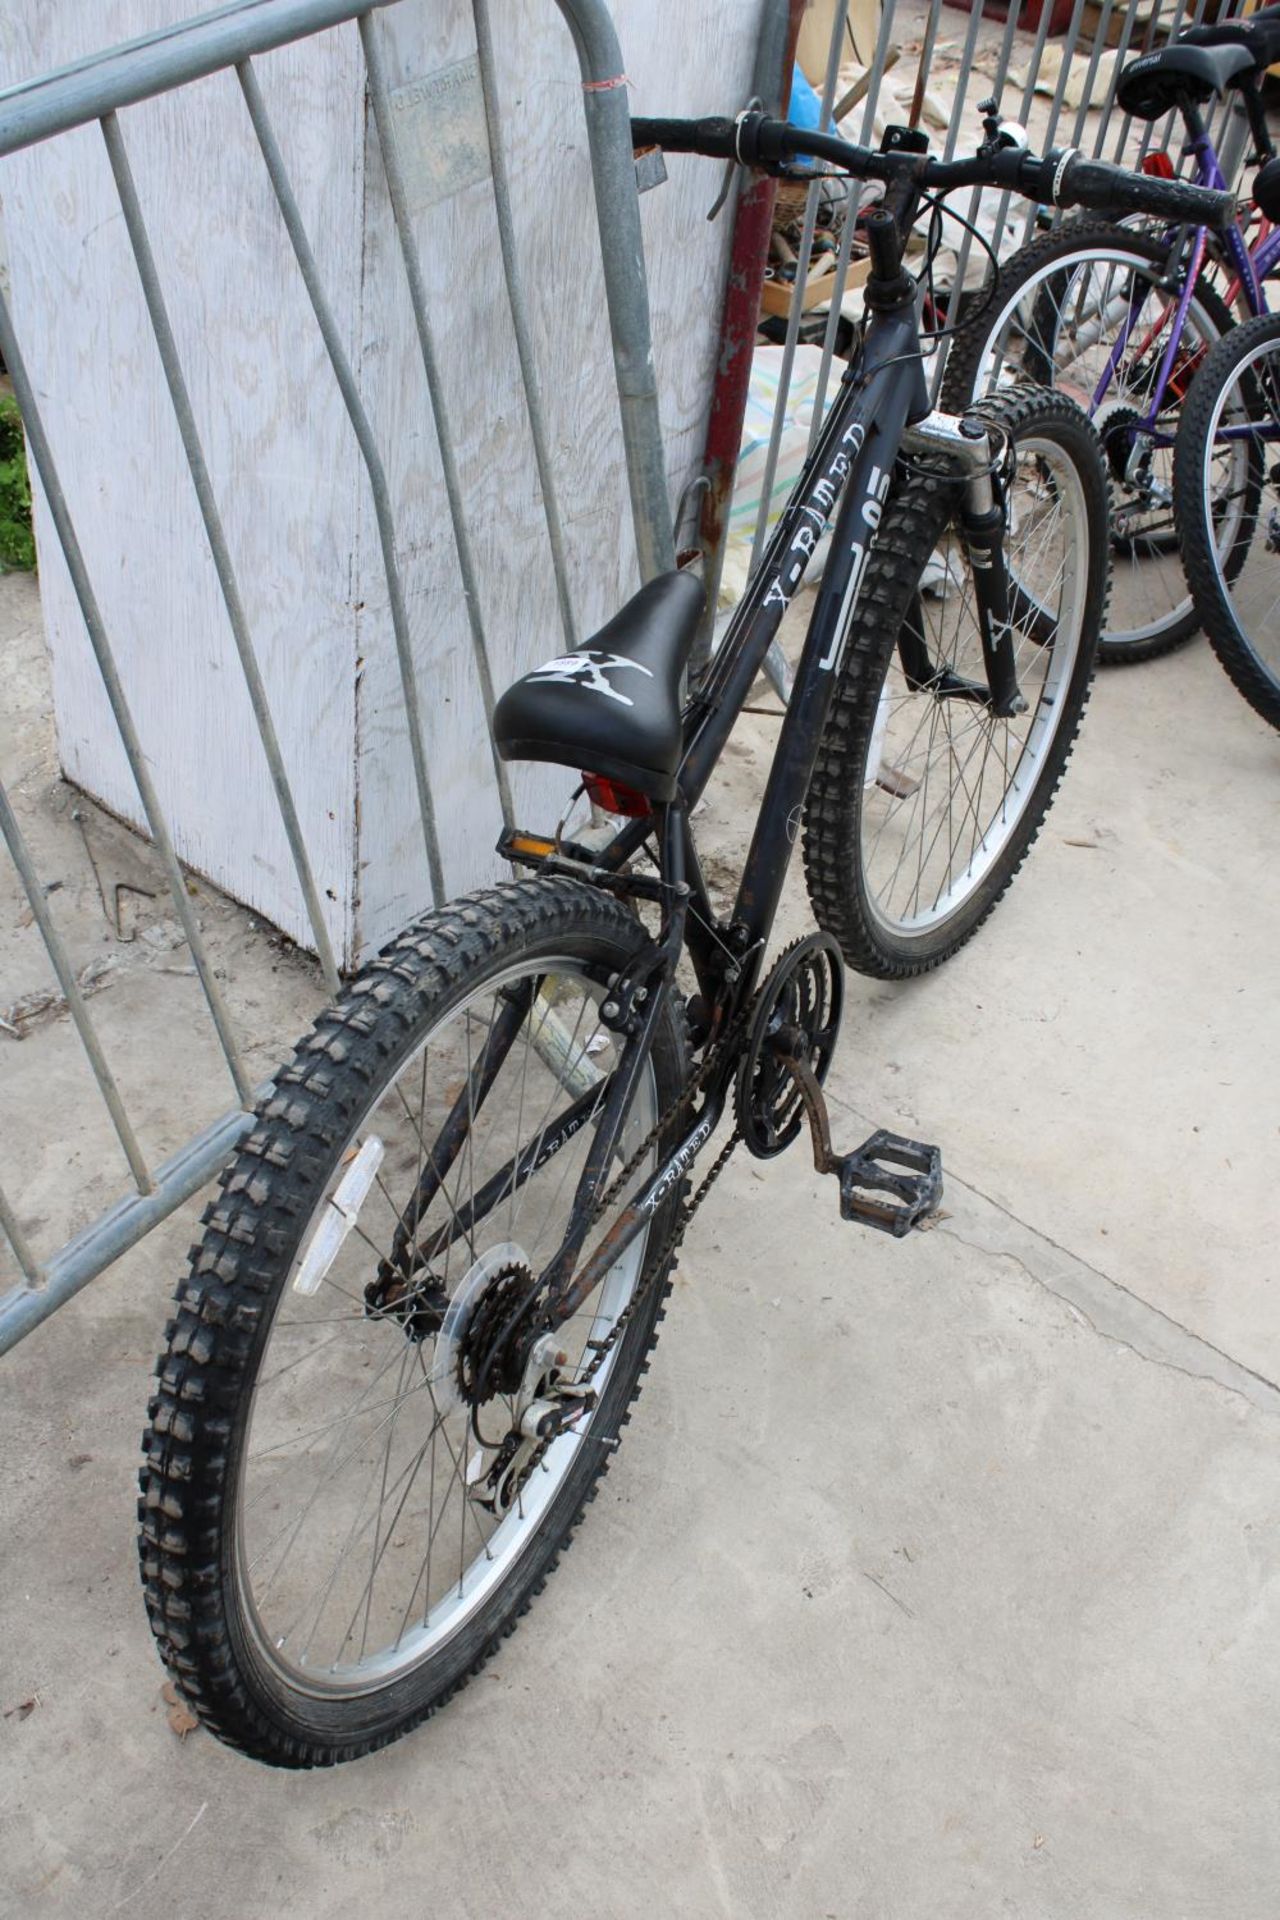 A BOYS MOUNTAIN BIKE WITH FRONT SUSPENSION AND 18 SPEED GEAR SYSTEM - Image 2 of 3